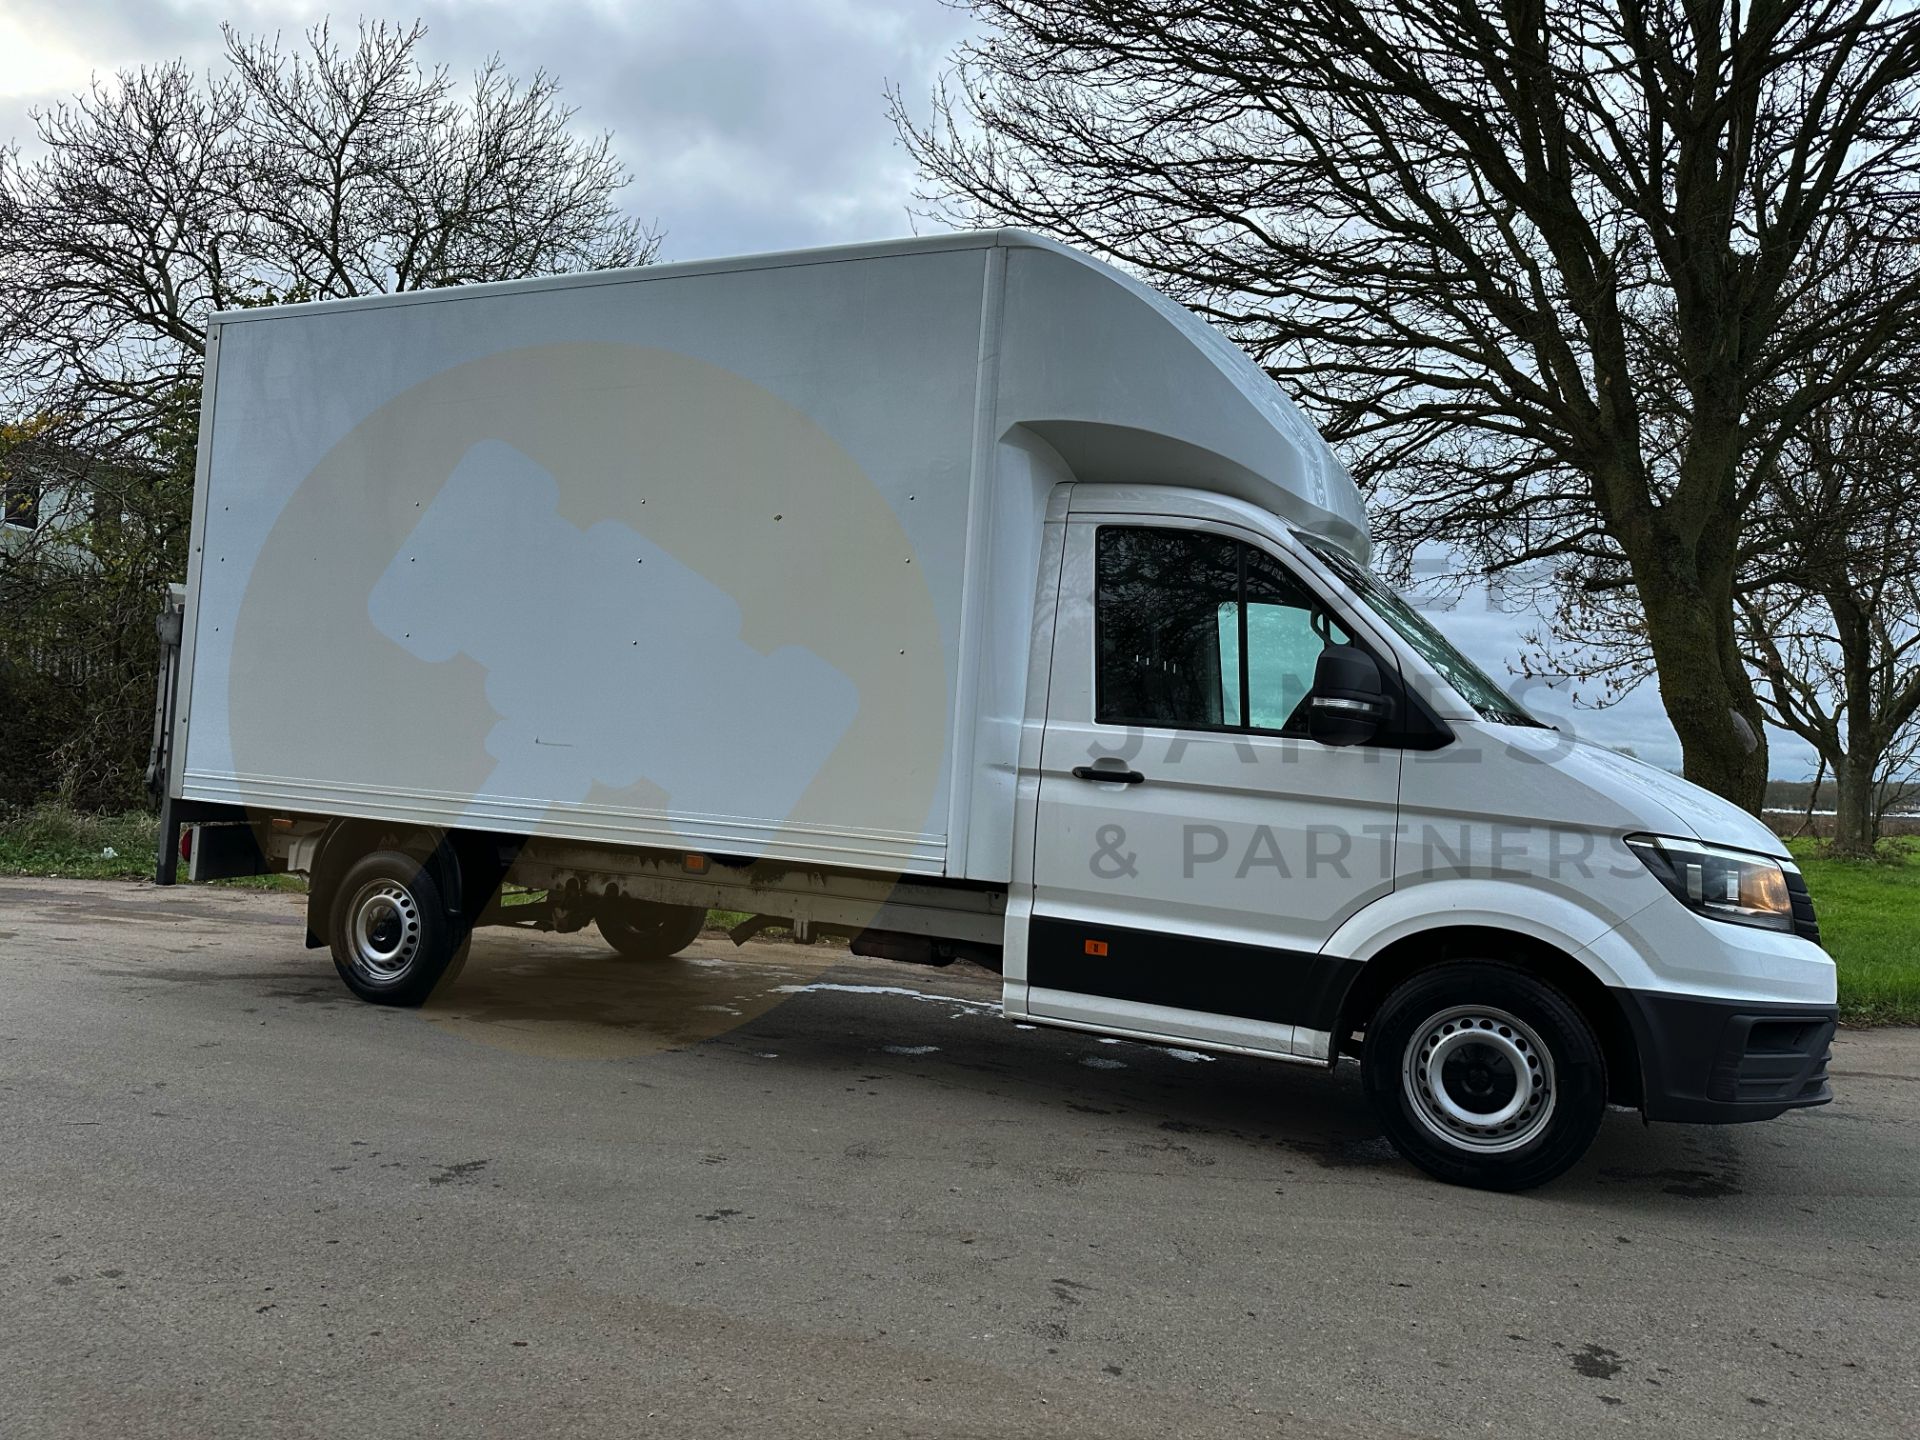 (ON SALE) VOLKSWAGEN CRAFTER CR35 *LUTON / BOX VAN* (2020 - EURO 6) 2.0 TDI - 6 SPEED *TAIL-LIFT* - Image 2 of 38